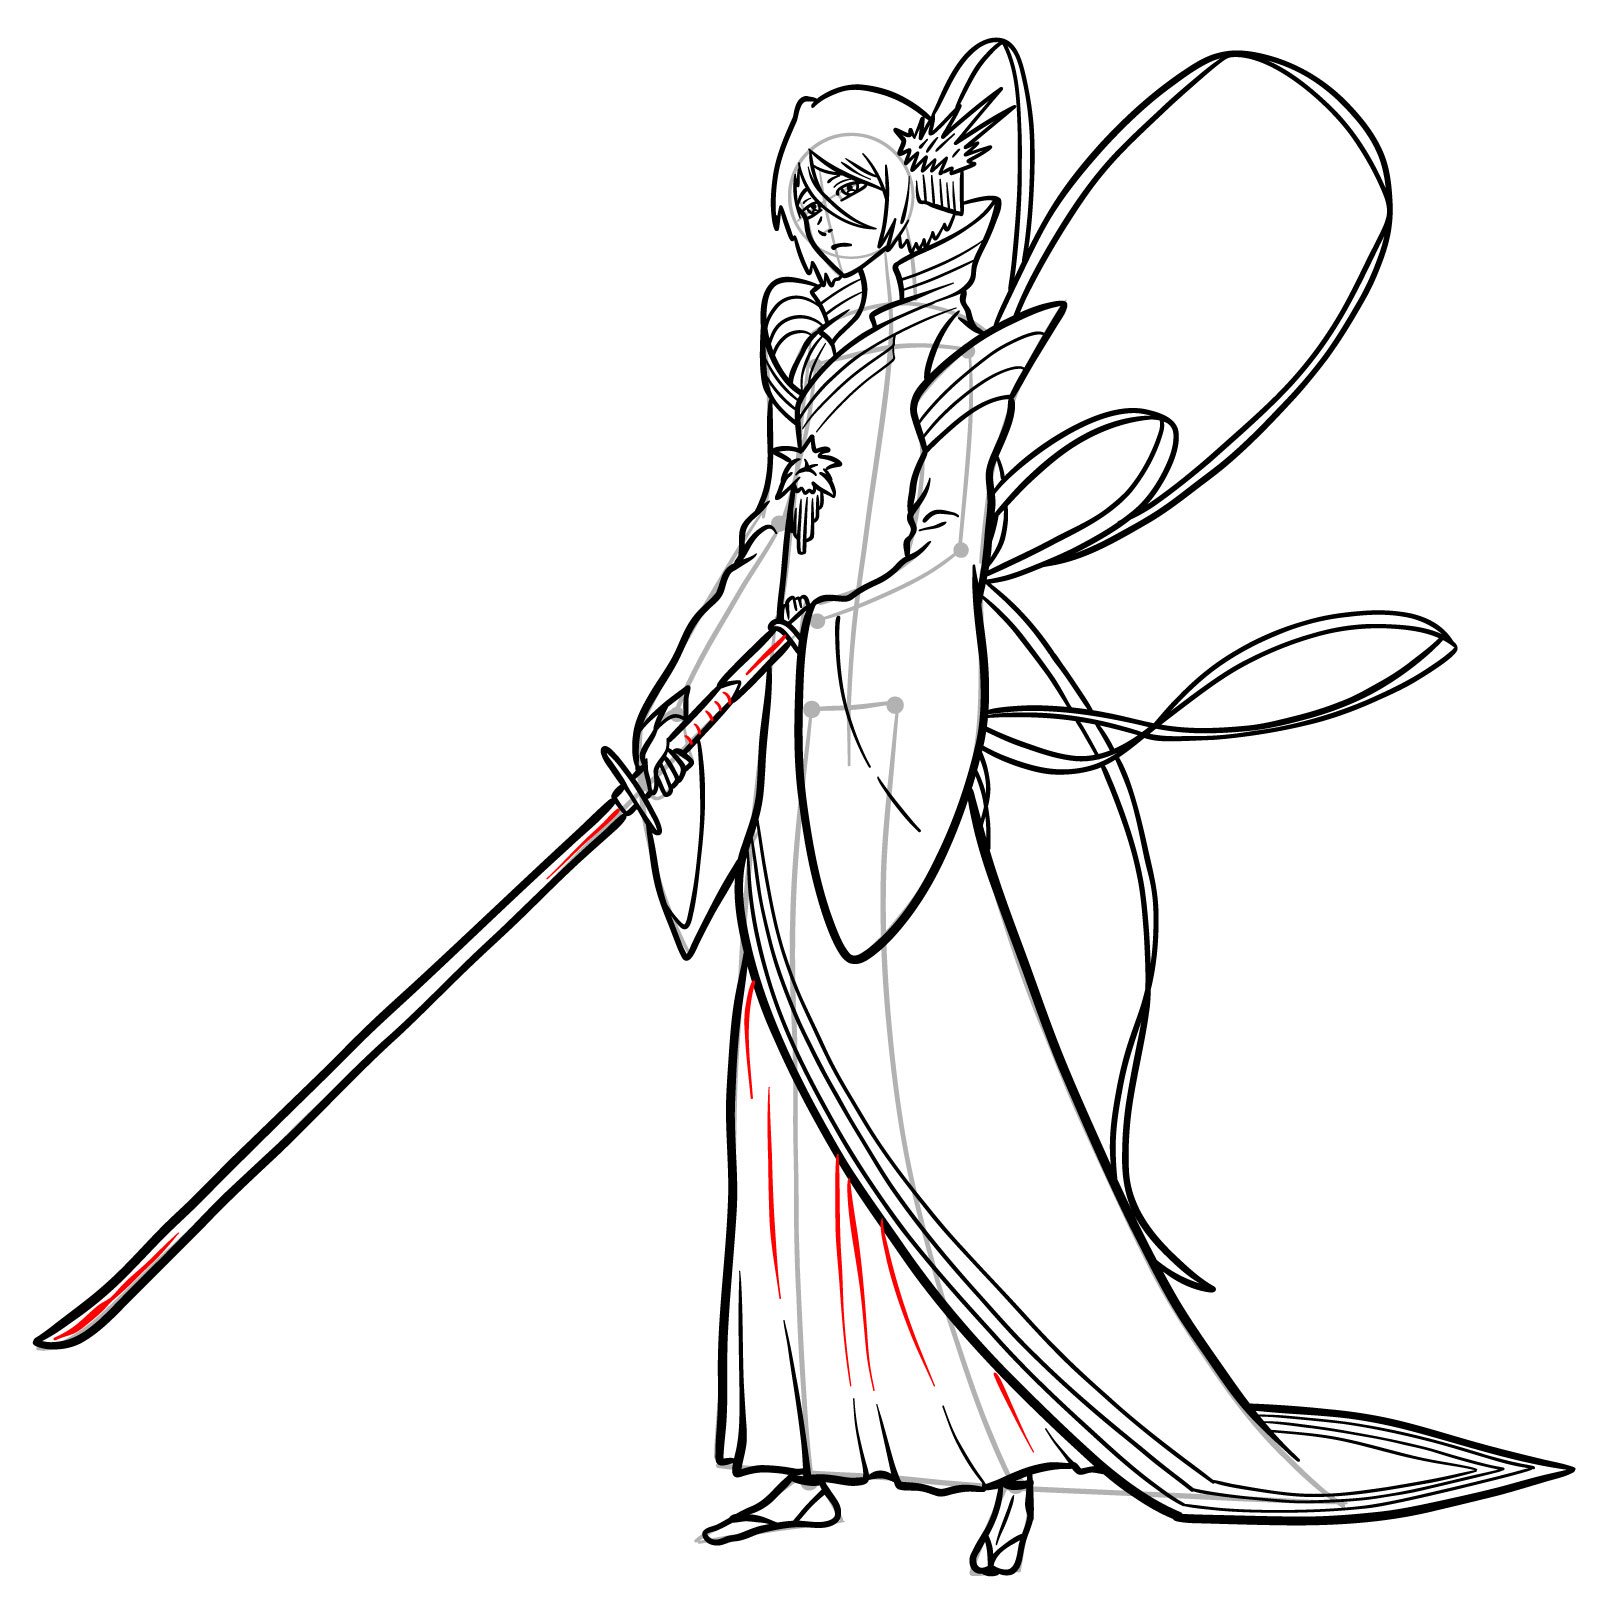 Detailed sketch emphasizing the flowy nature of the kimono and the intricacies of Rukia's weapon design. - step 30